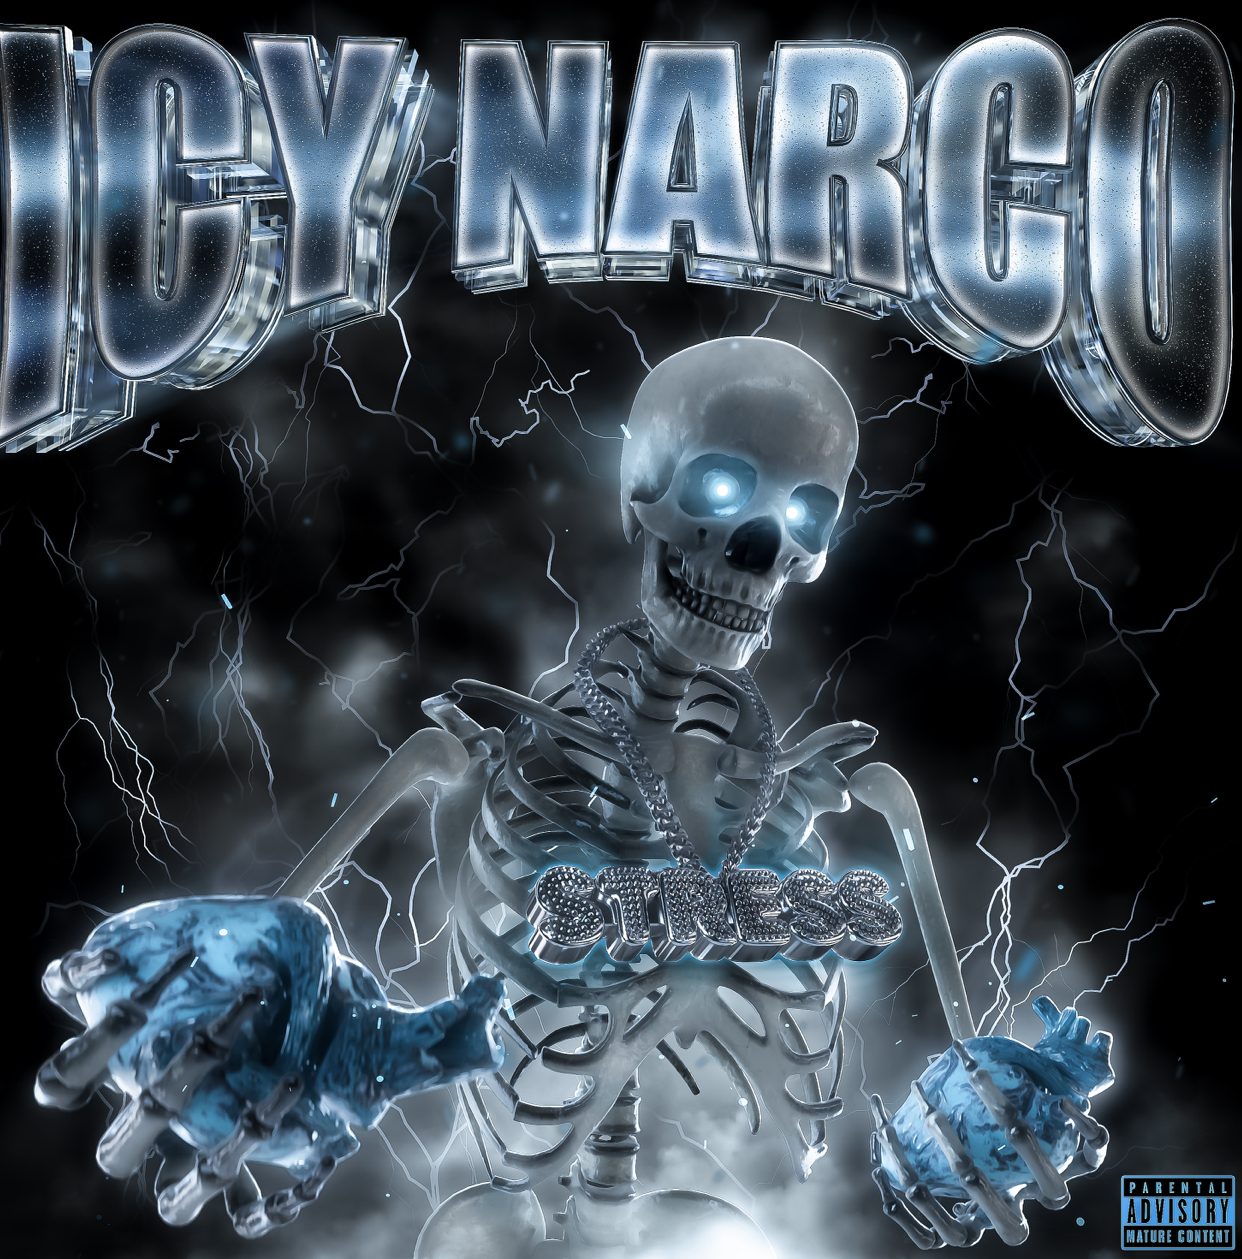 Already viewed by millions worldwide, ICY NARCO is back with the powerful single ‘Stress’